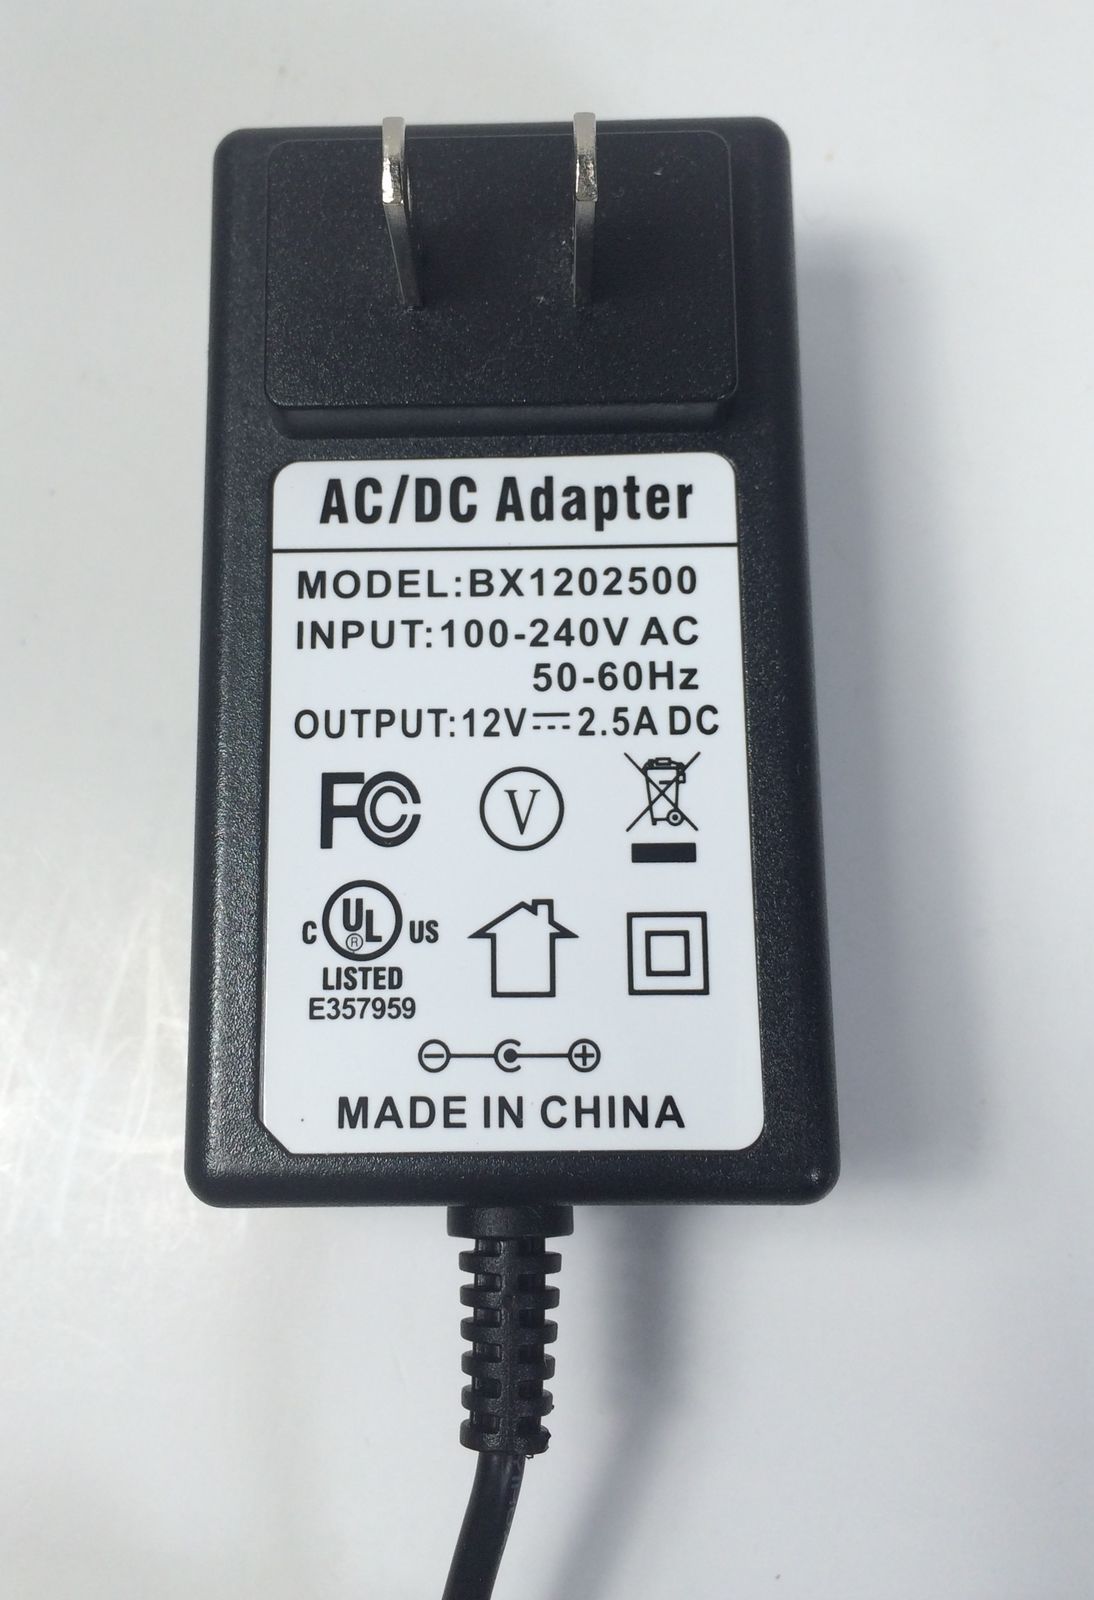 NEW AC/DC Adapter for Lorex BX1202500 BX 1202500 DVR Security System DC 12V 3A